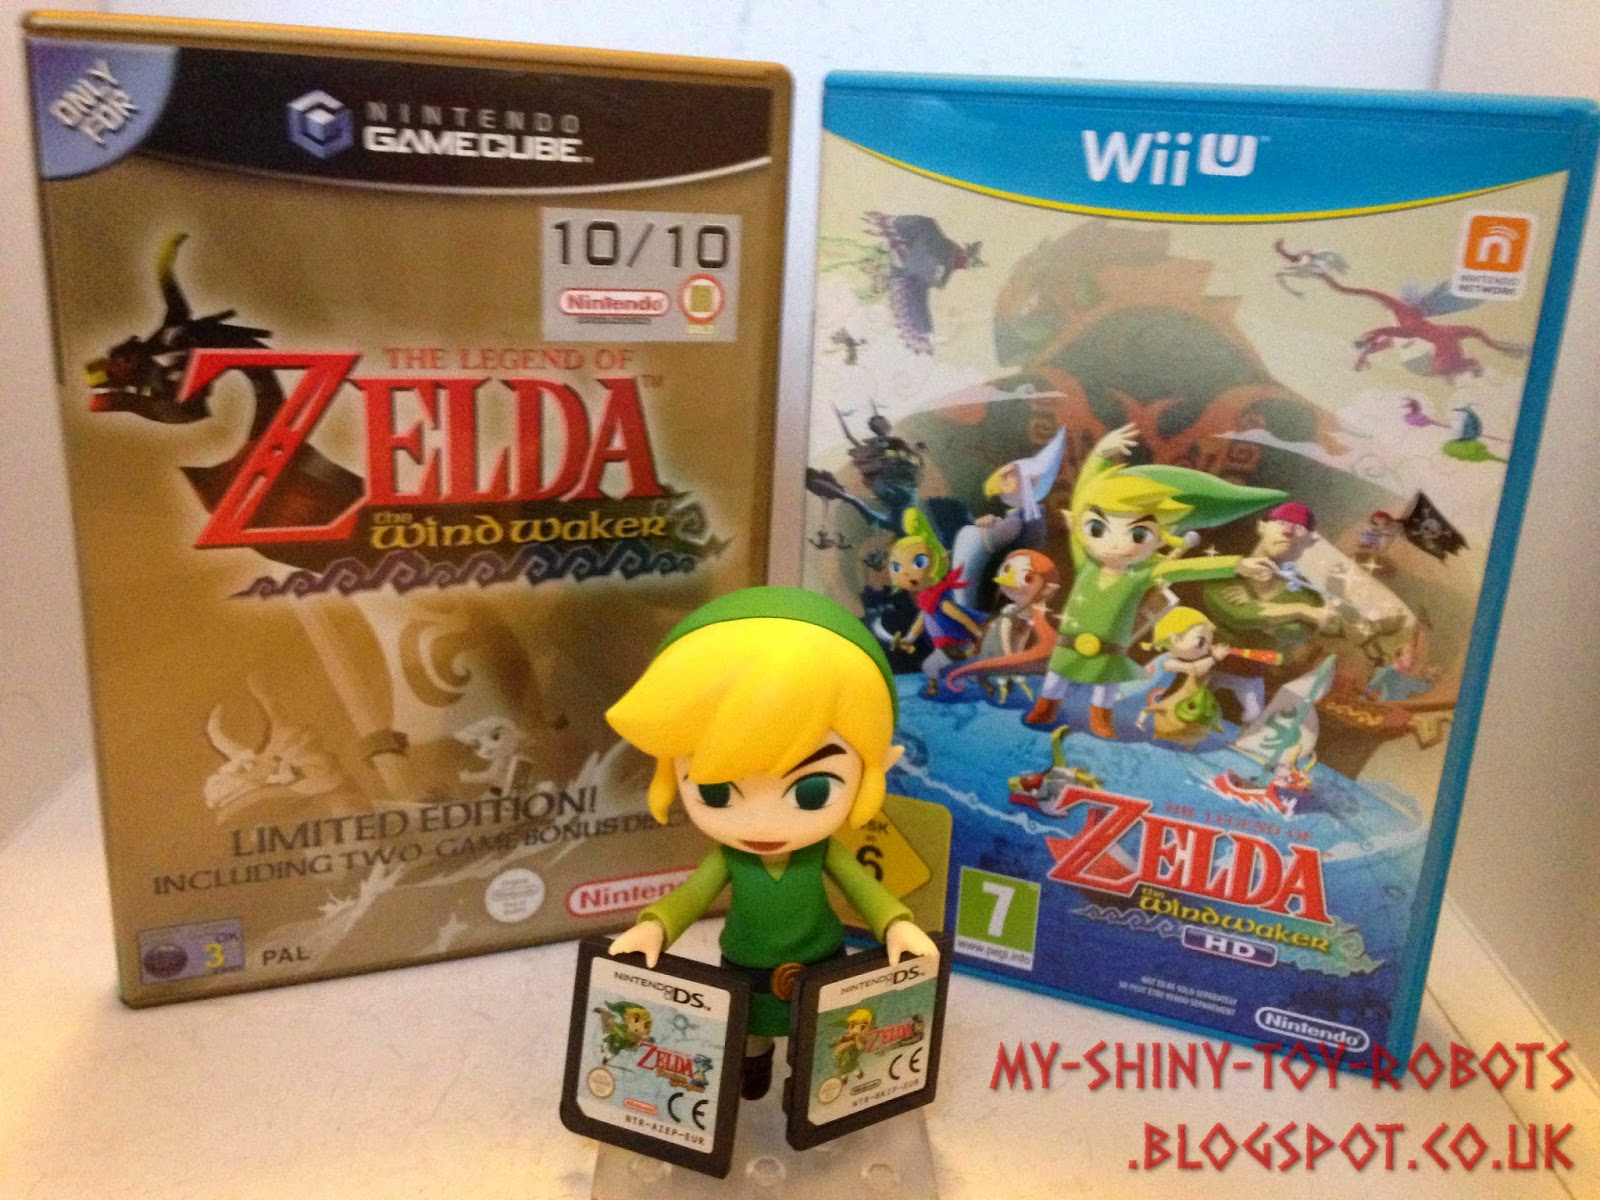 Link and his game collection